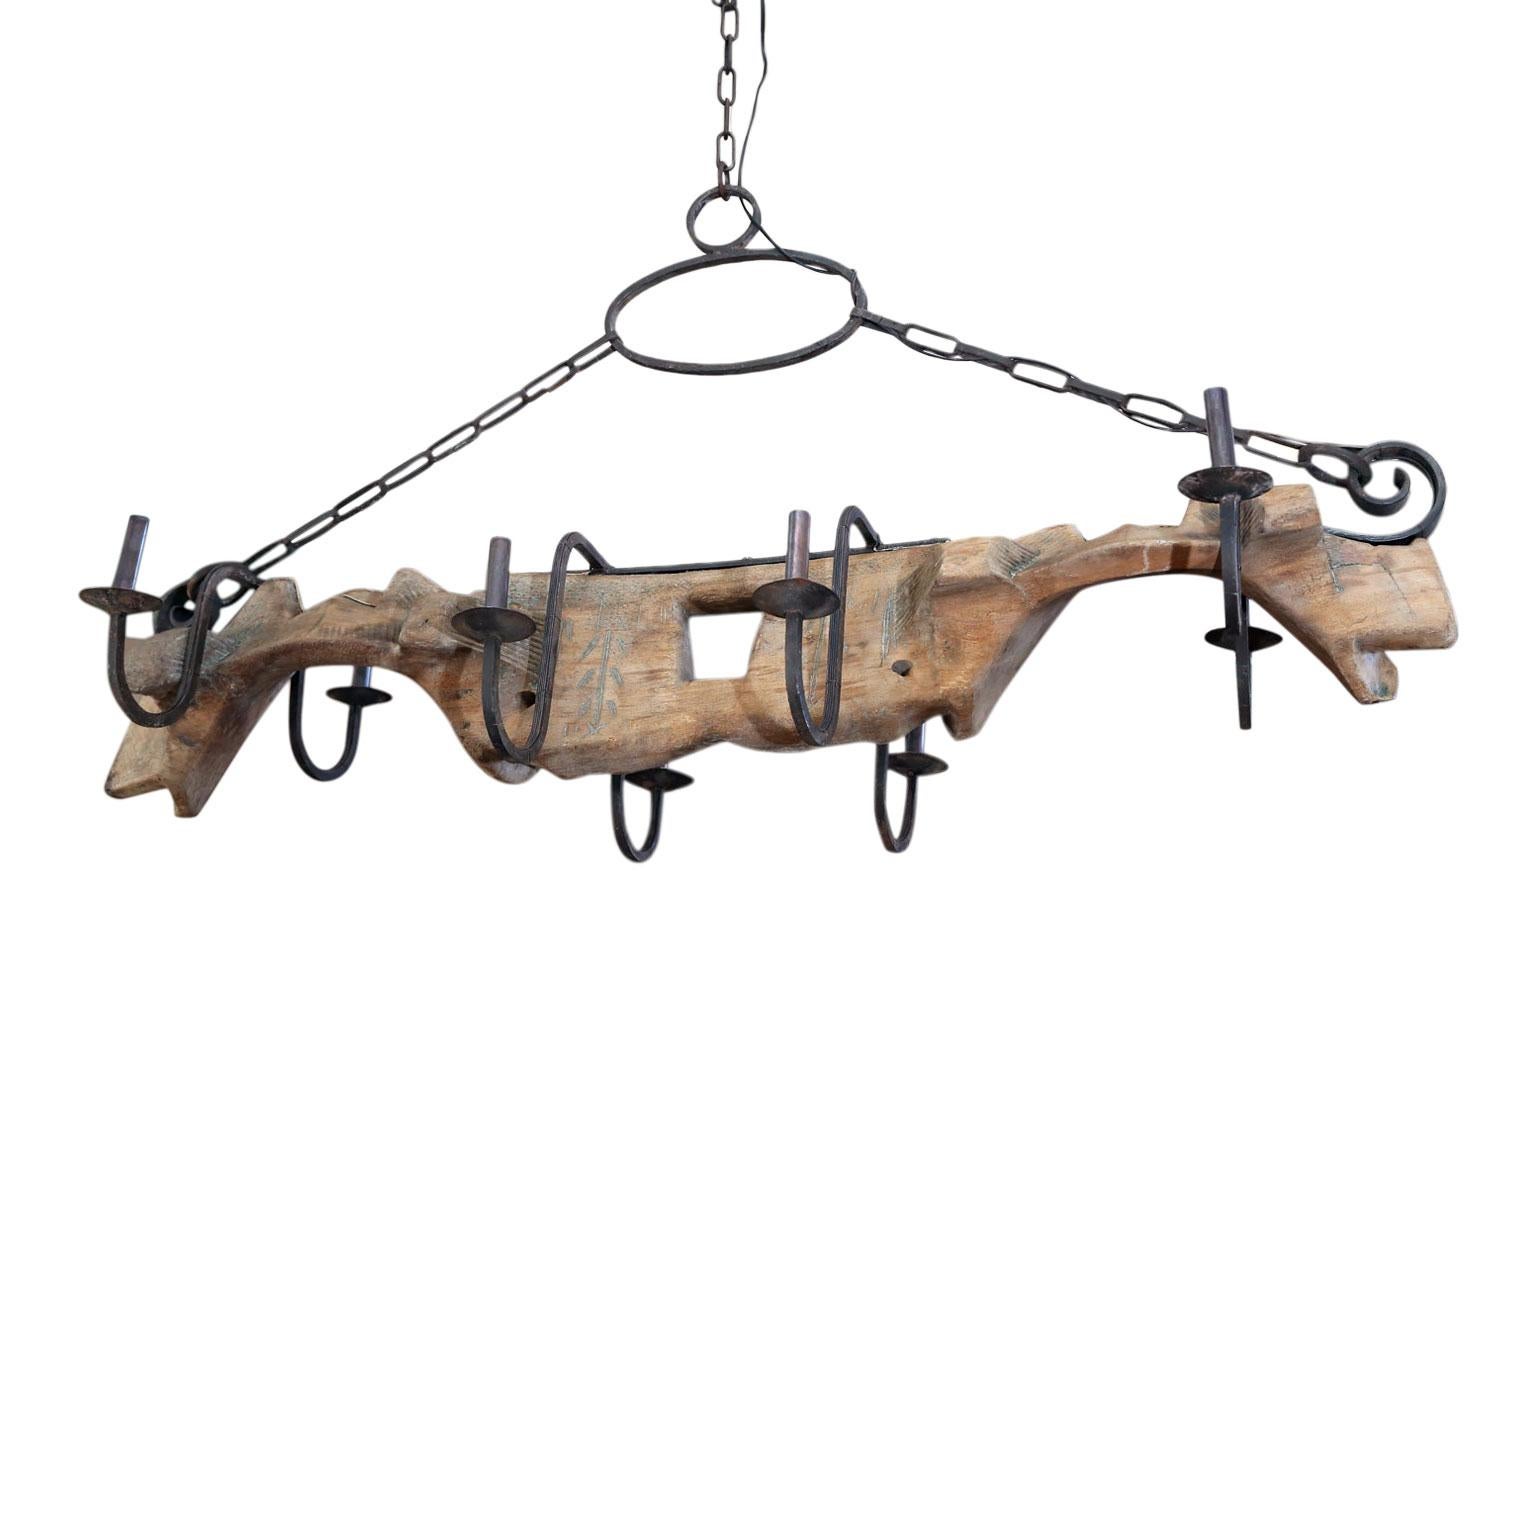 Wonderful vintage French yoke chandelier: made from circa 1900 hand-carved oxen yoke. Altered into a chandelier in the 1950s with the additional of forged iron arms. Delightful early hand painted decoration adorns its wooden surface. Perfect for